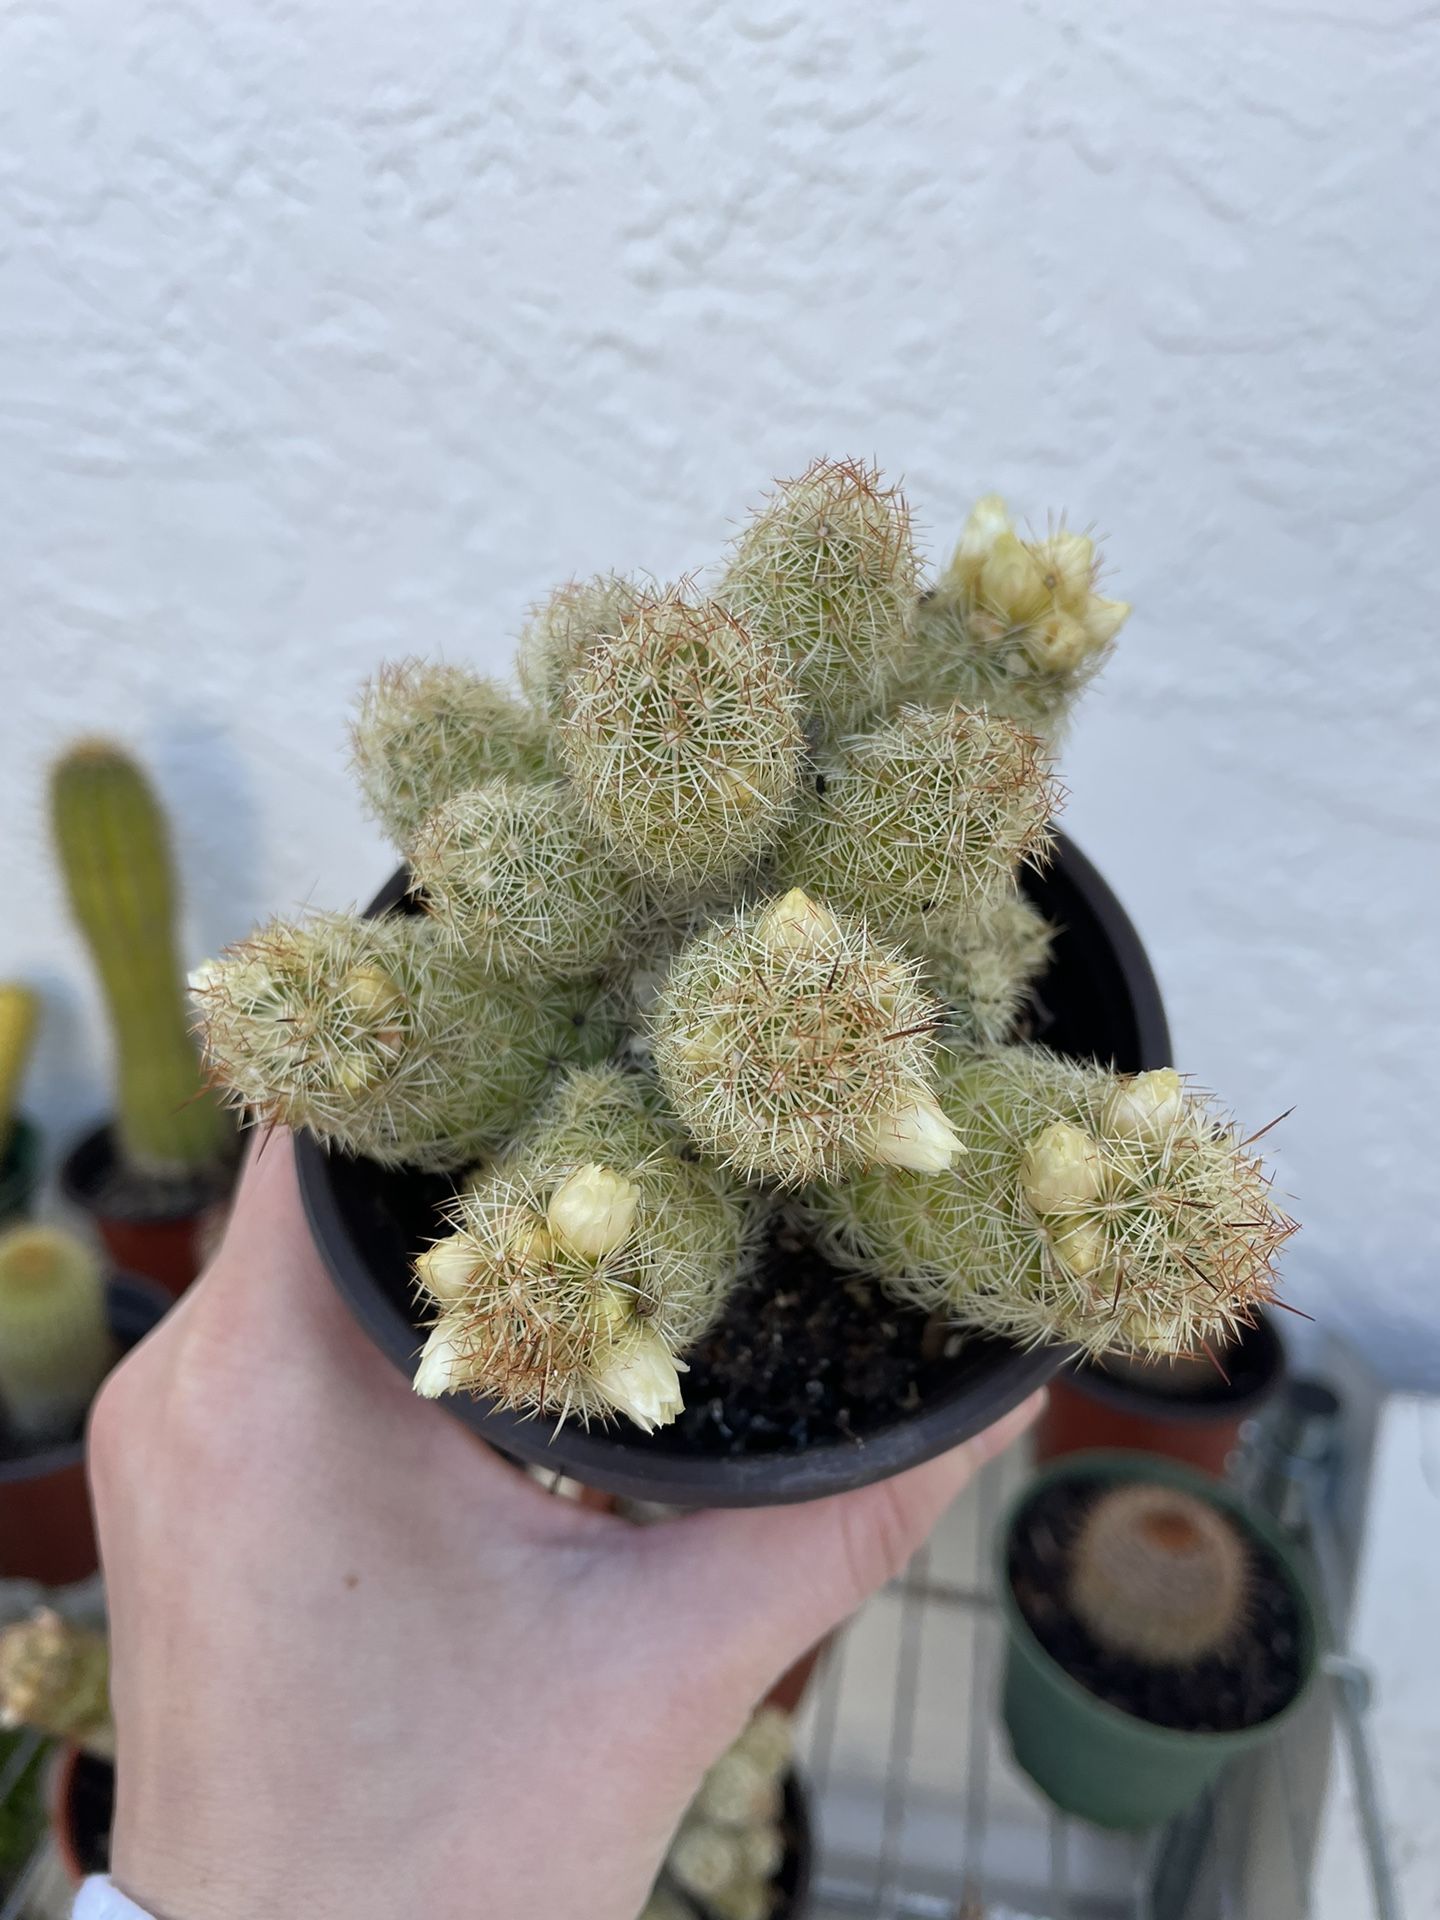 4in Pot Many Fingers Cactus Plant 